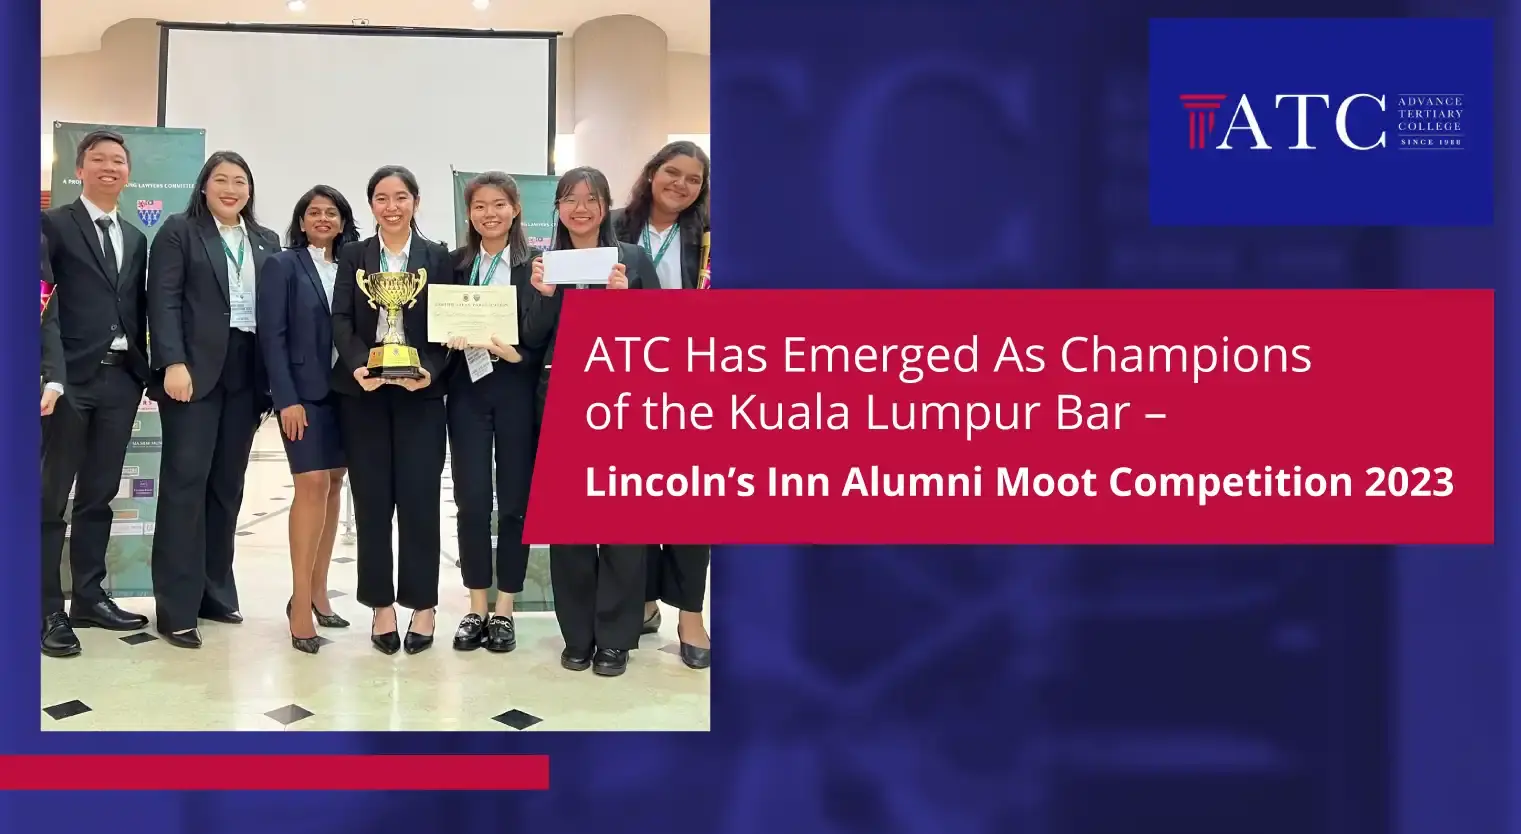 atc-emerges-champion-kl-bar-lincoln-inn-alumni-moot-competition-2023